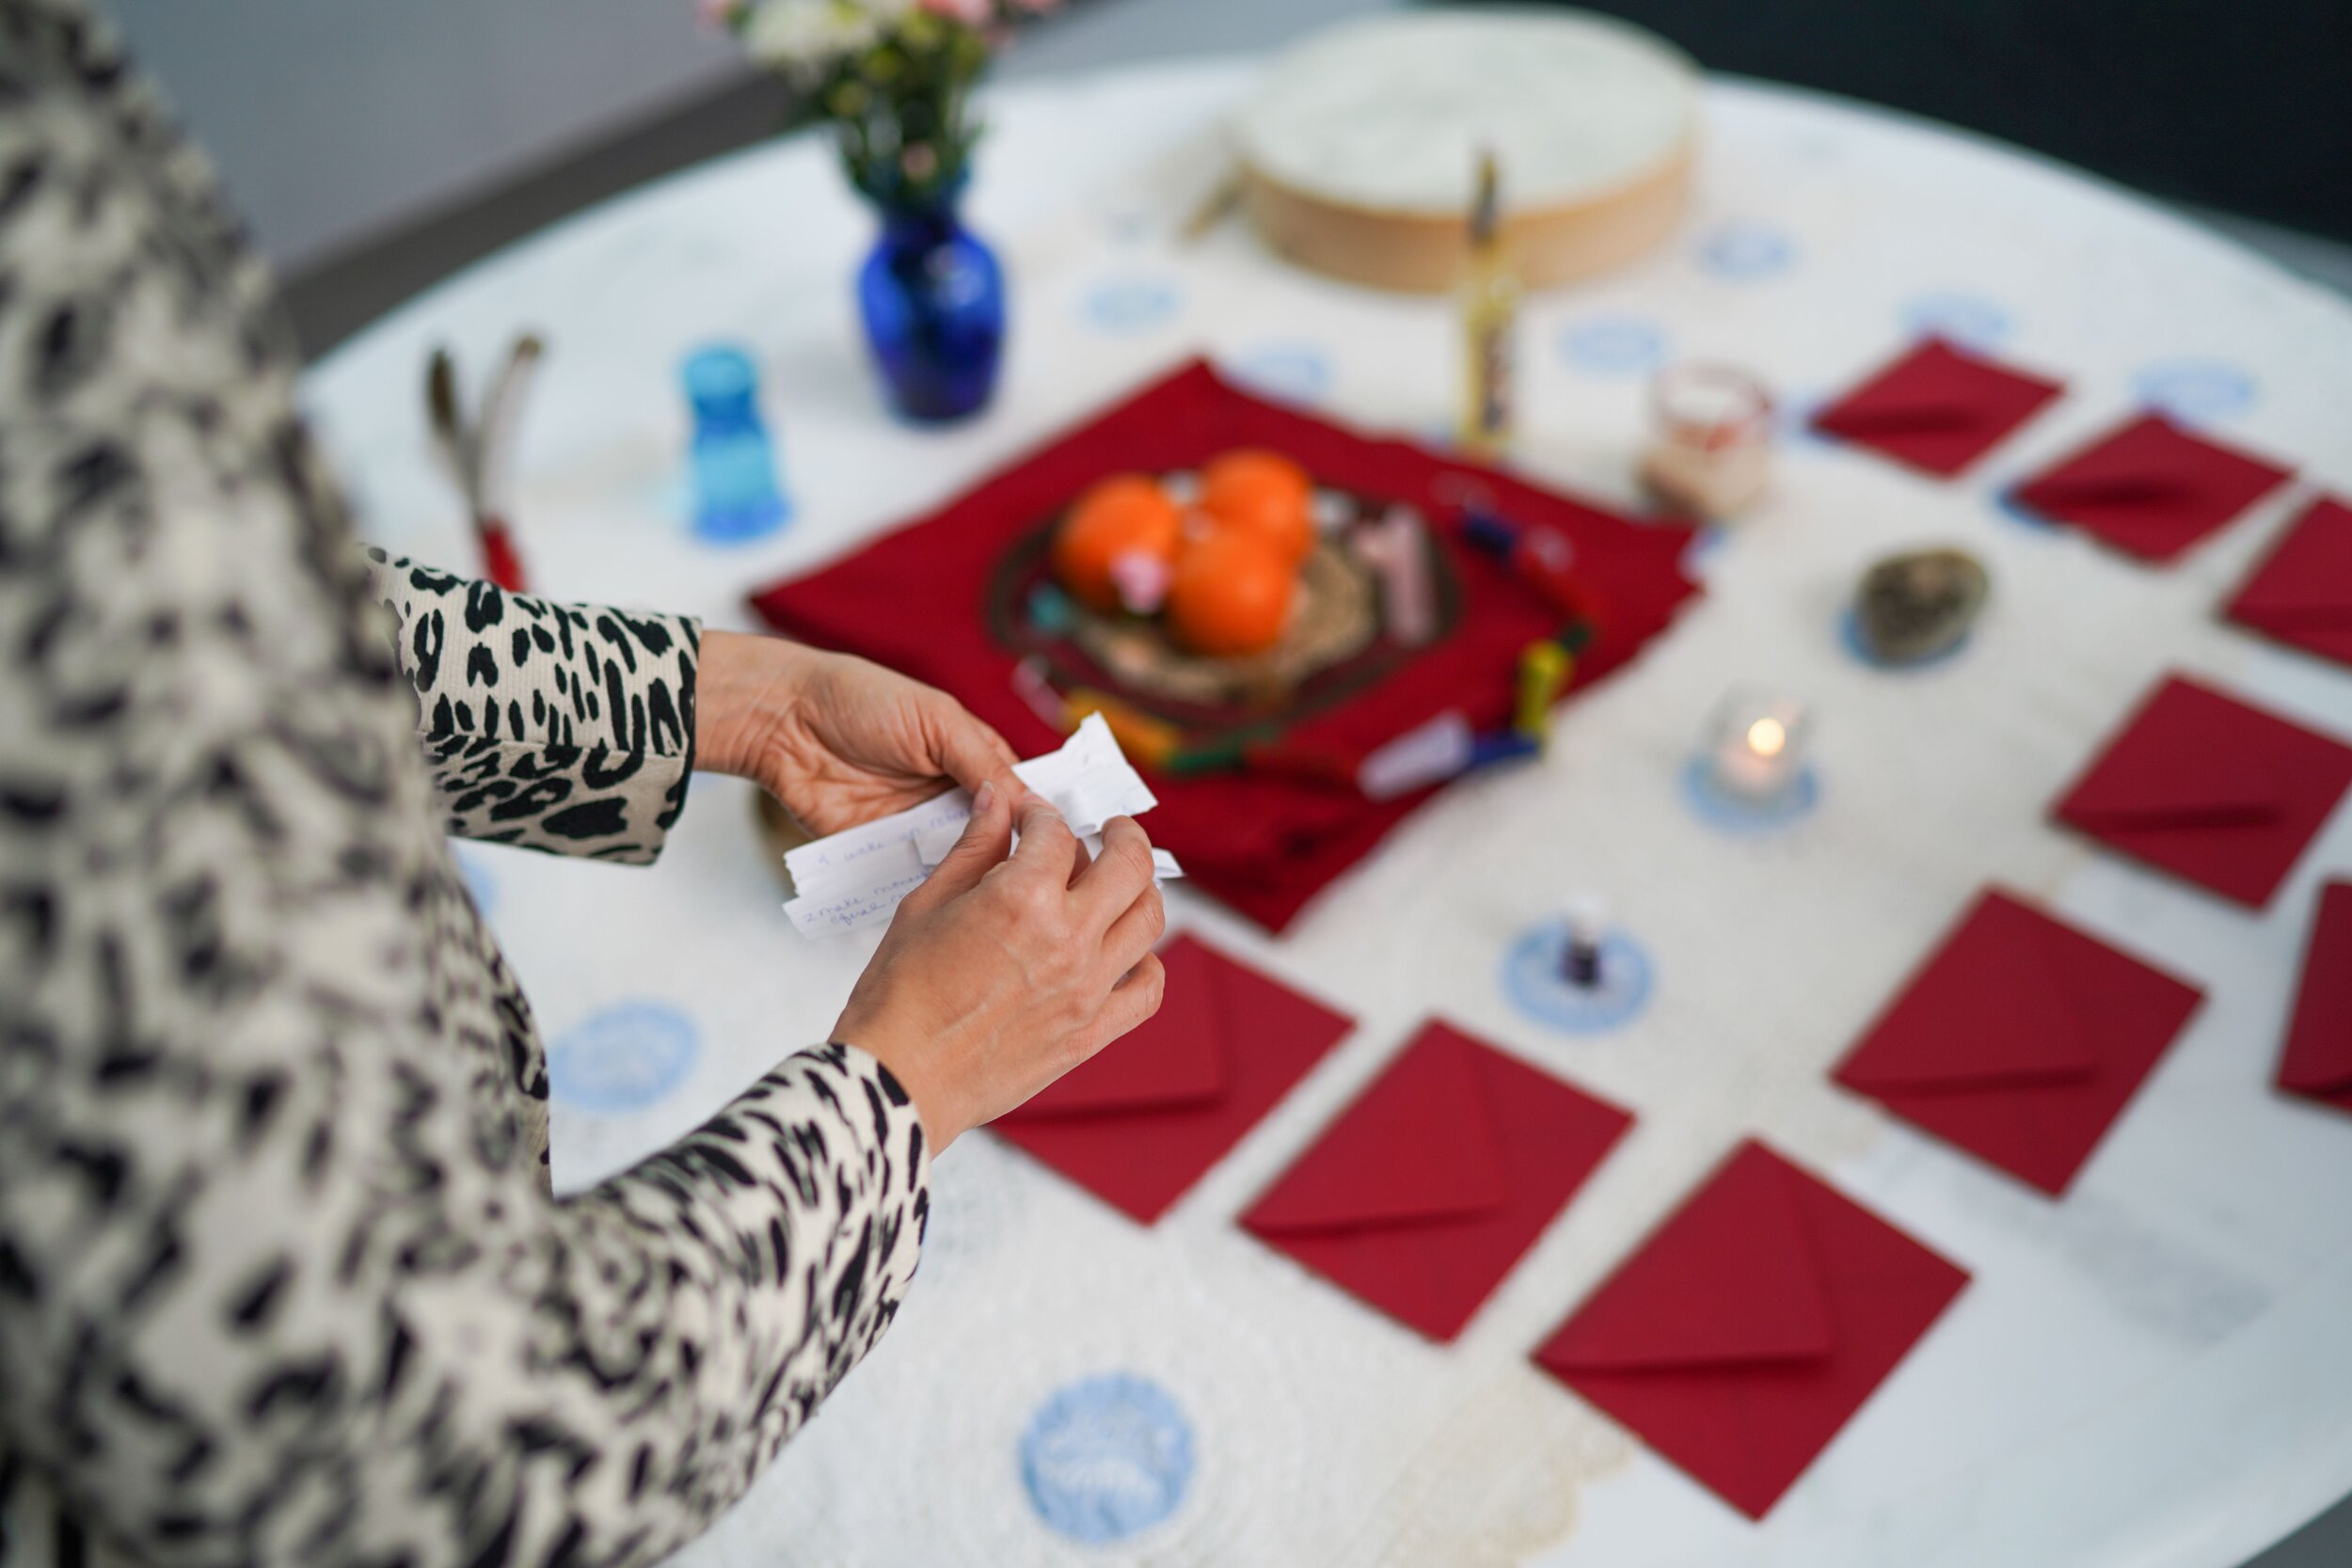 intention ceremony feng shui manhattan consultant laura cerrano for The Cove long island city ny.jpeg